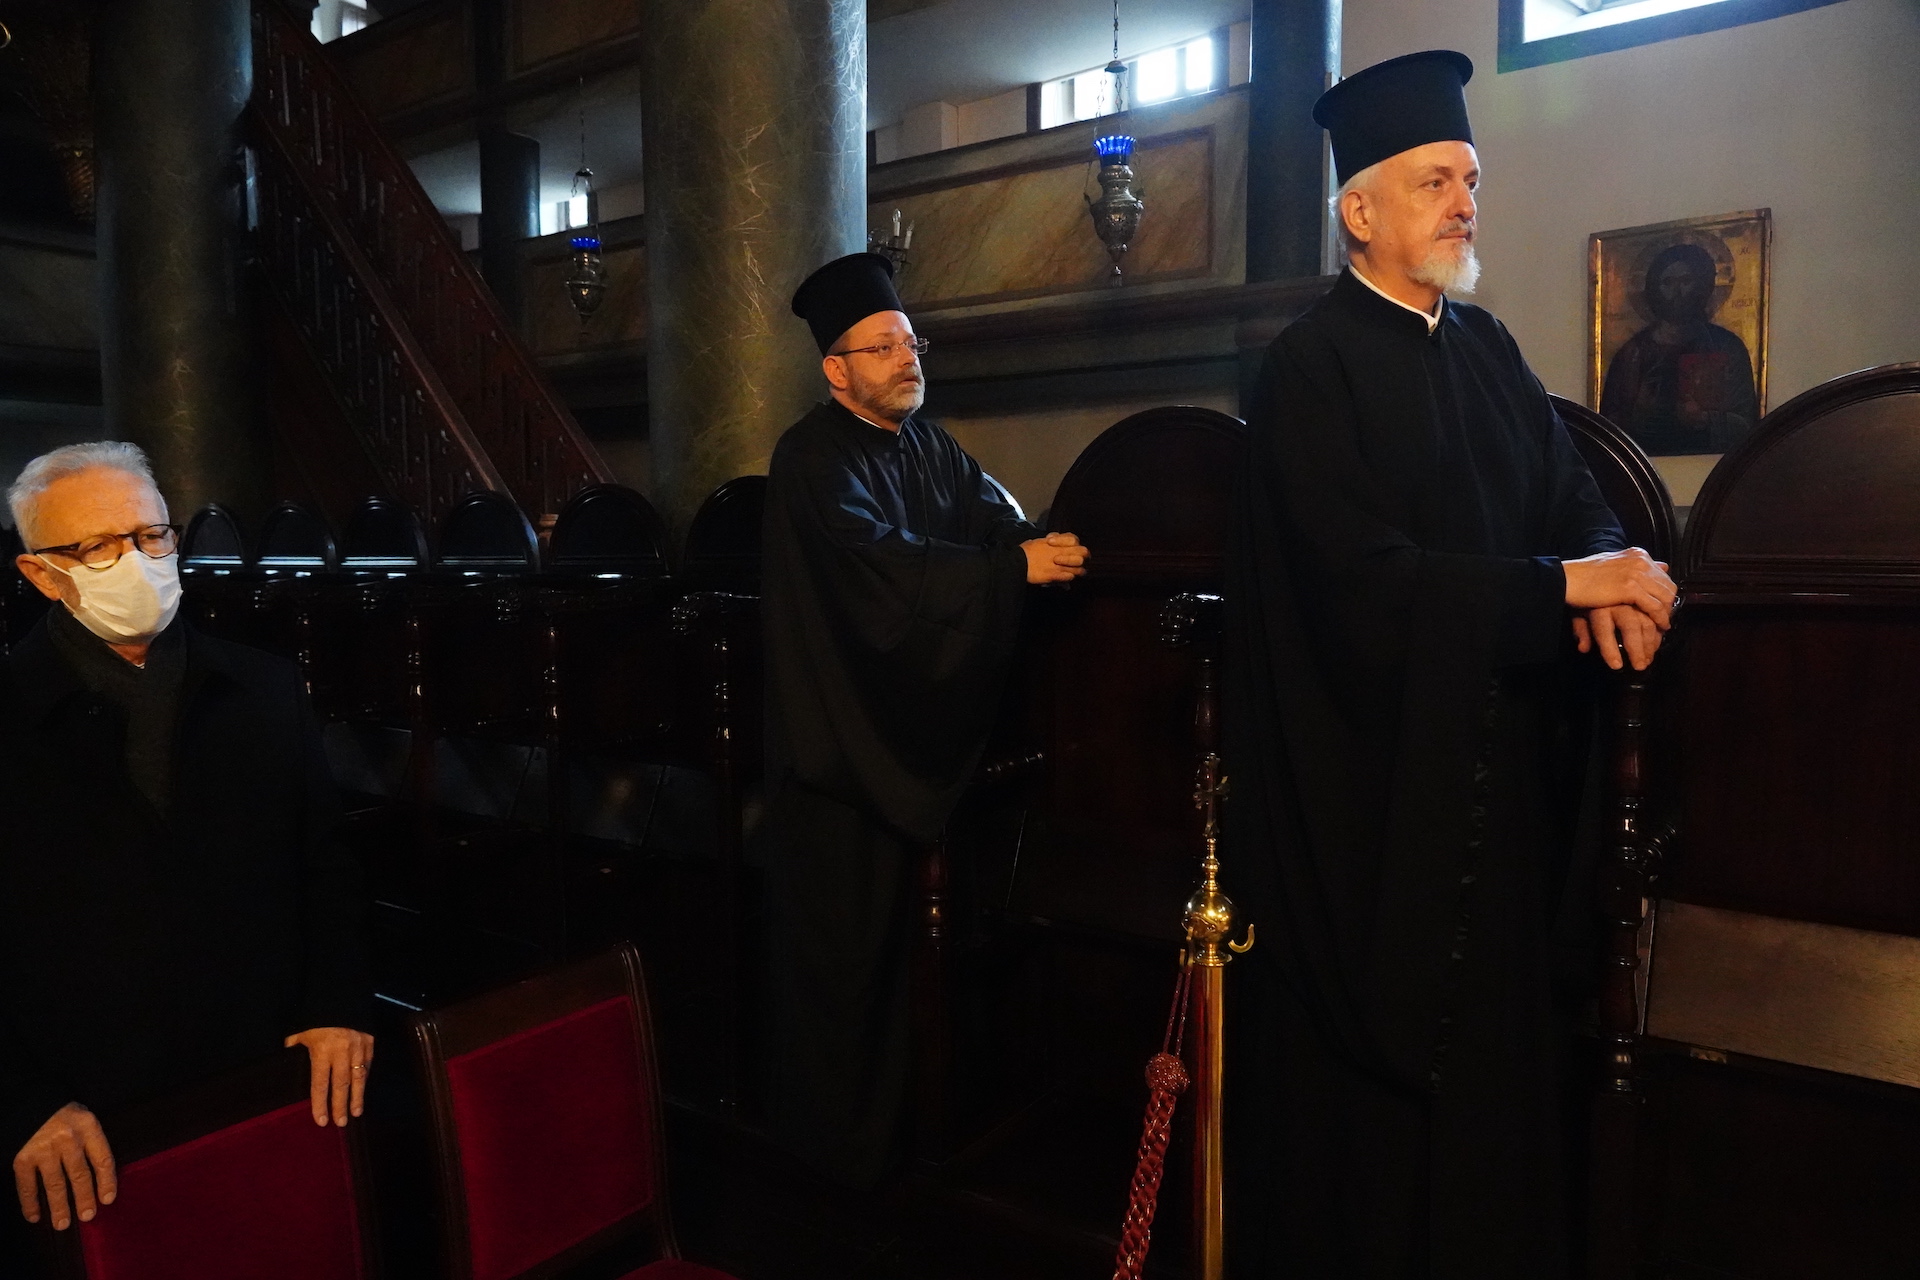 The Lesser and Greater Minima (Announcement) of the new Metropolitan Iakovos of Mexico